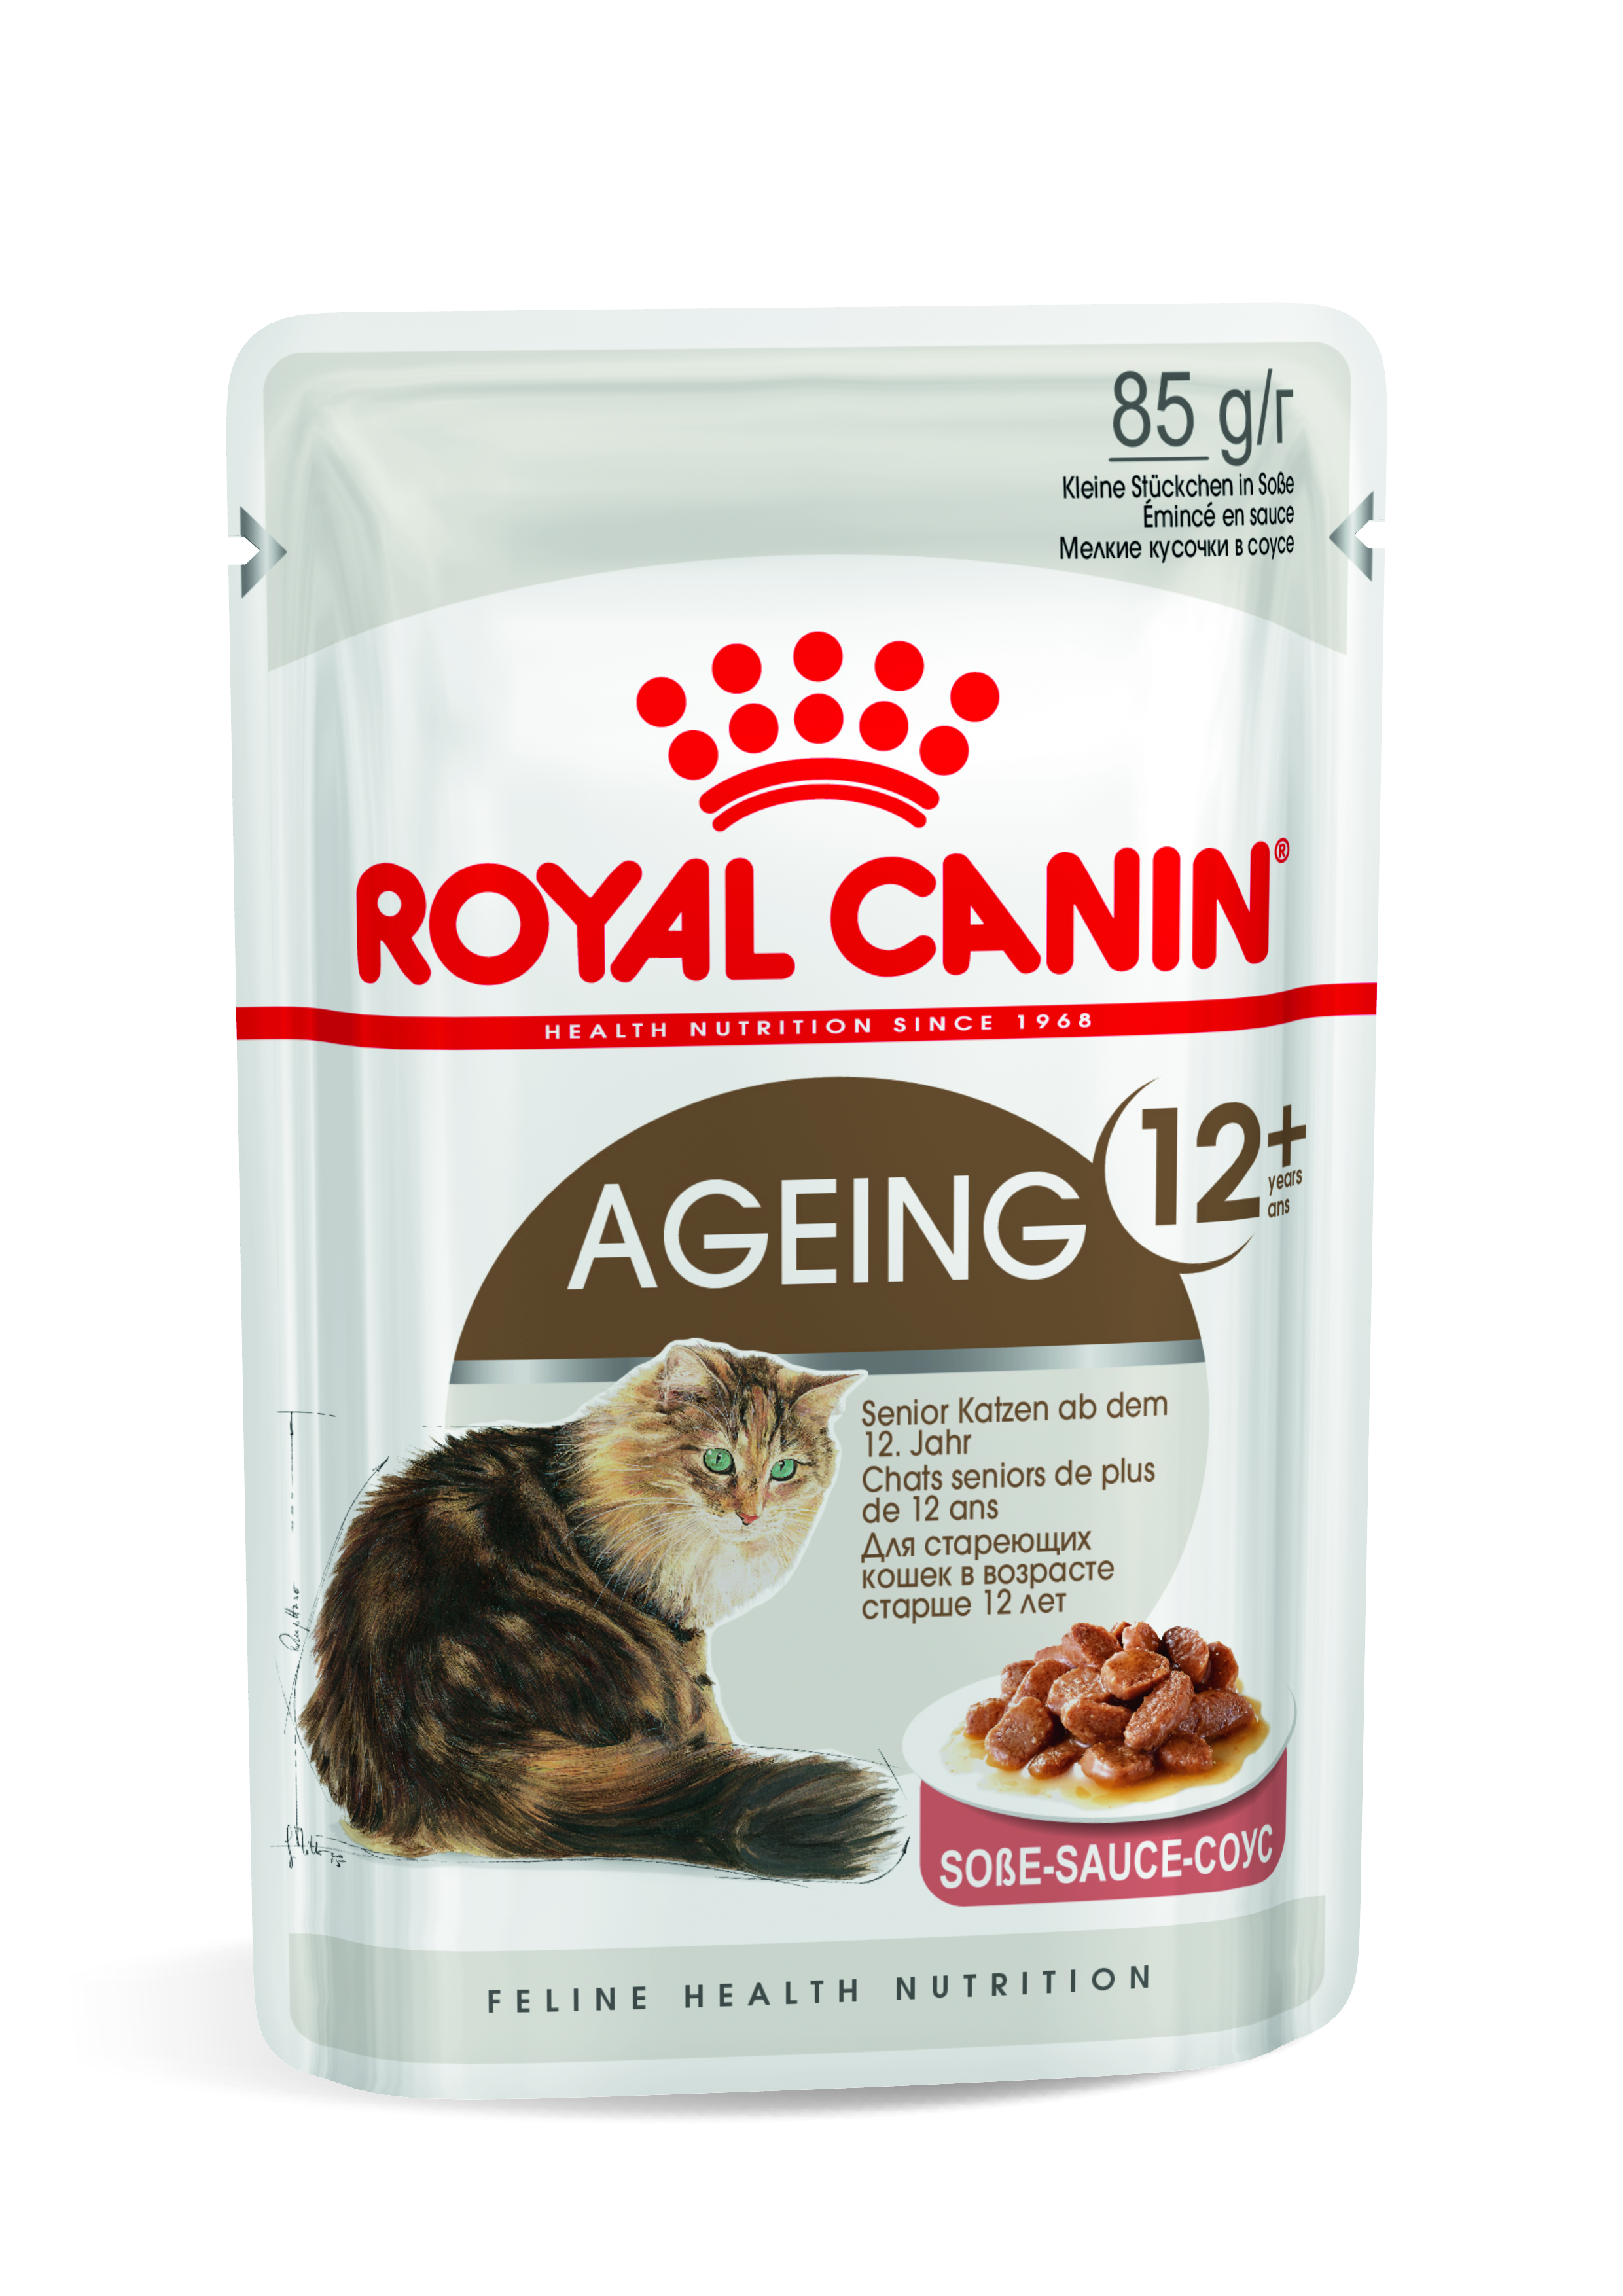 Where To Buy Royal Canin Cat Food Near Me CatWalls